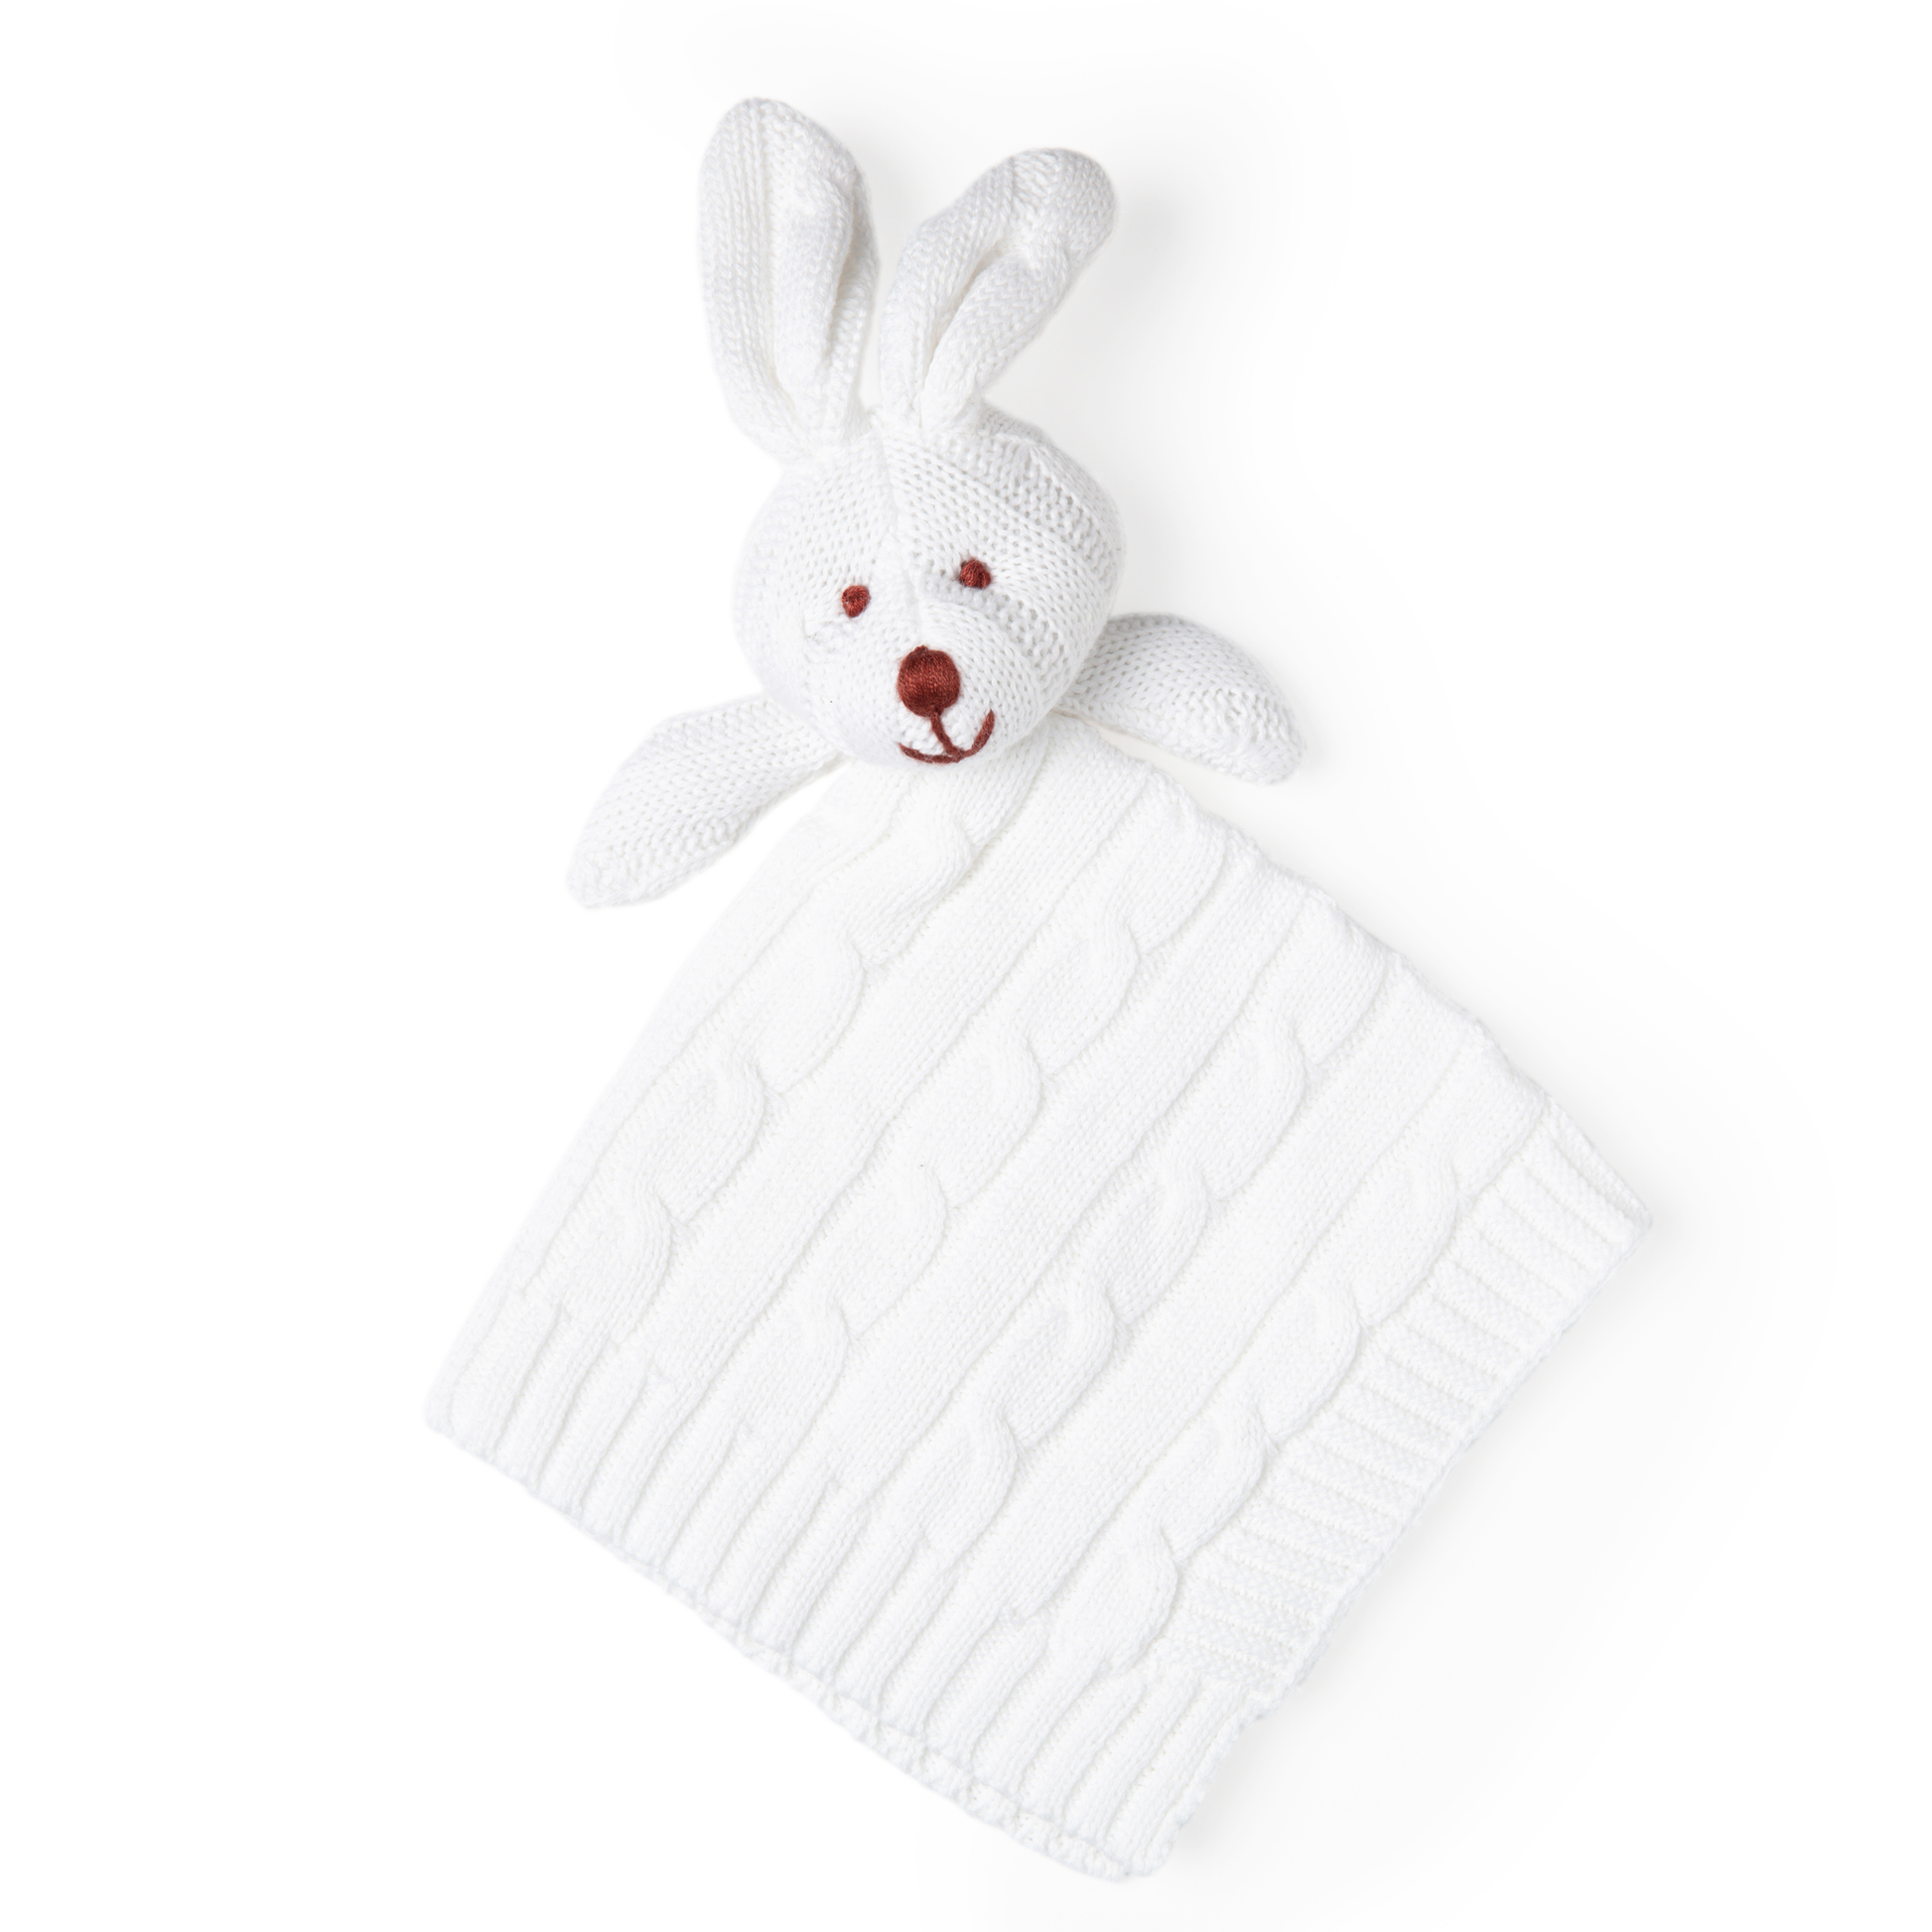 Bunny Knit Security Blanket - ittybittybubba